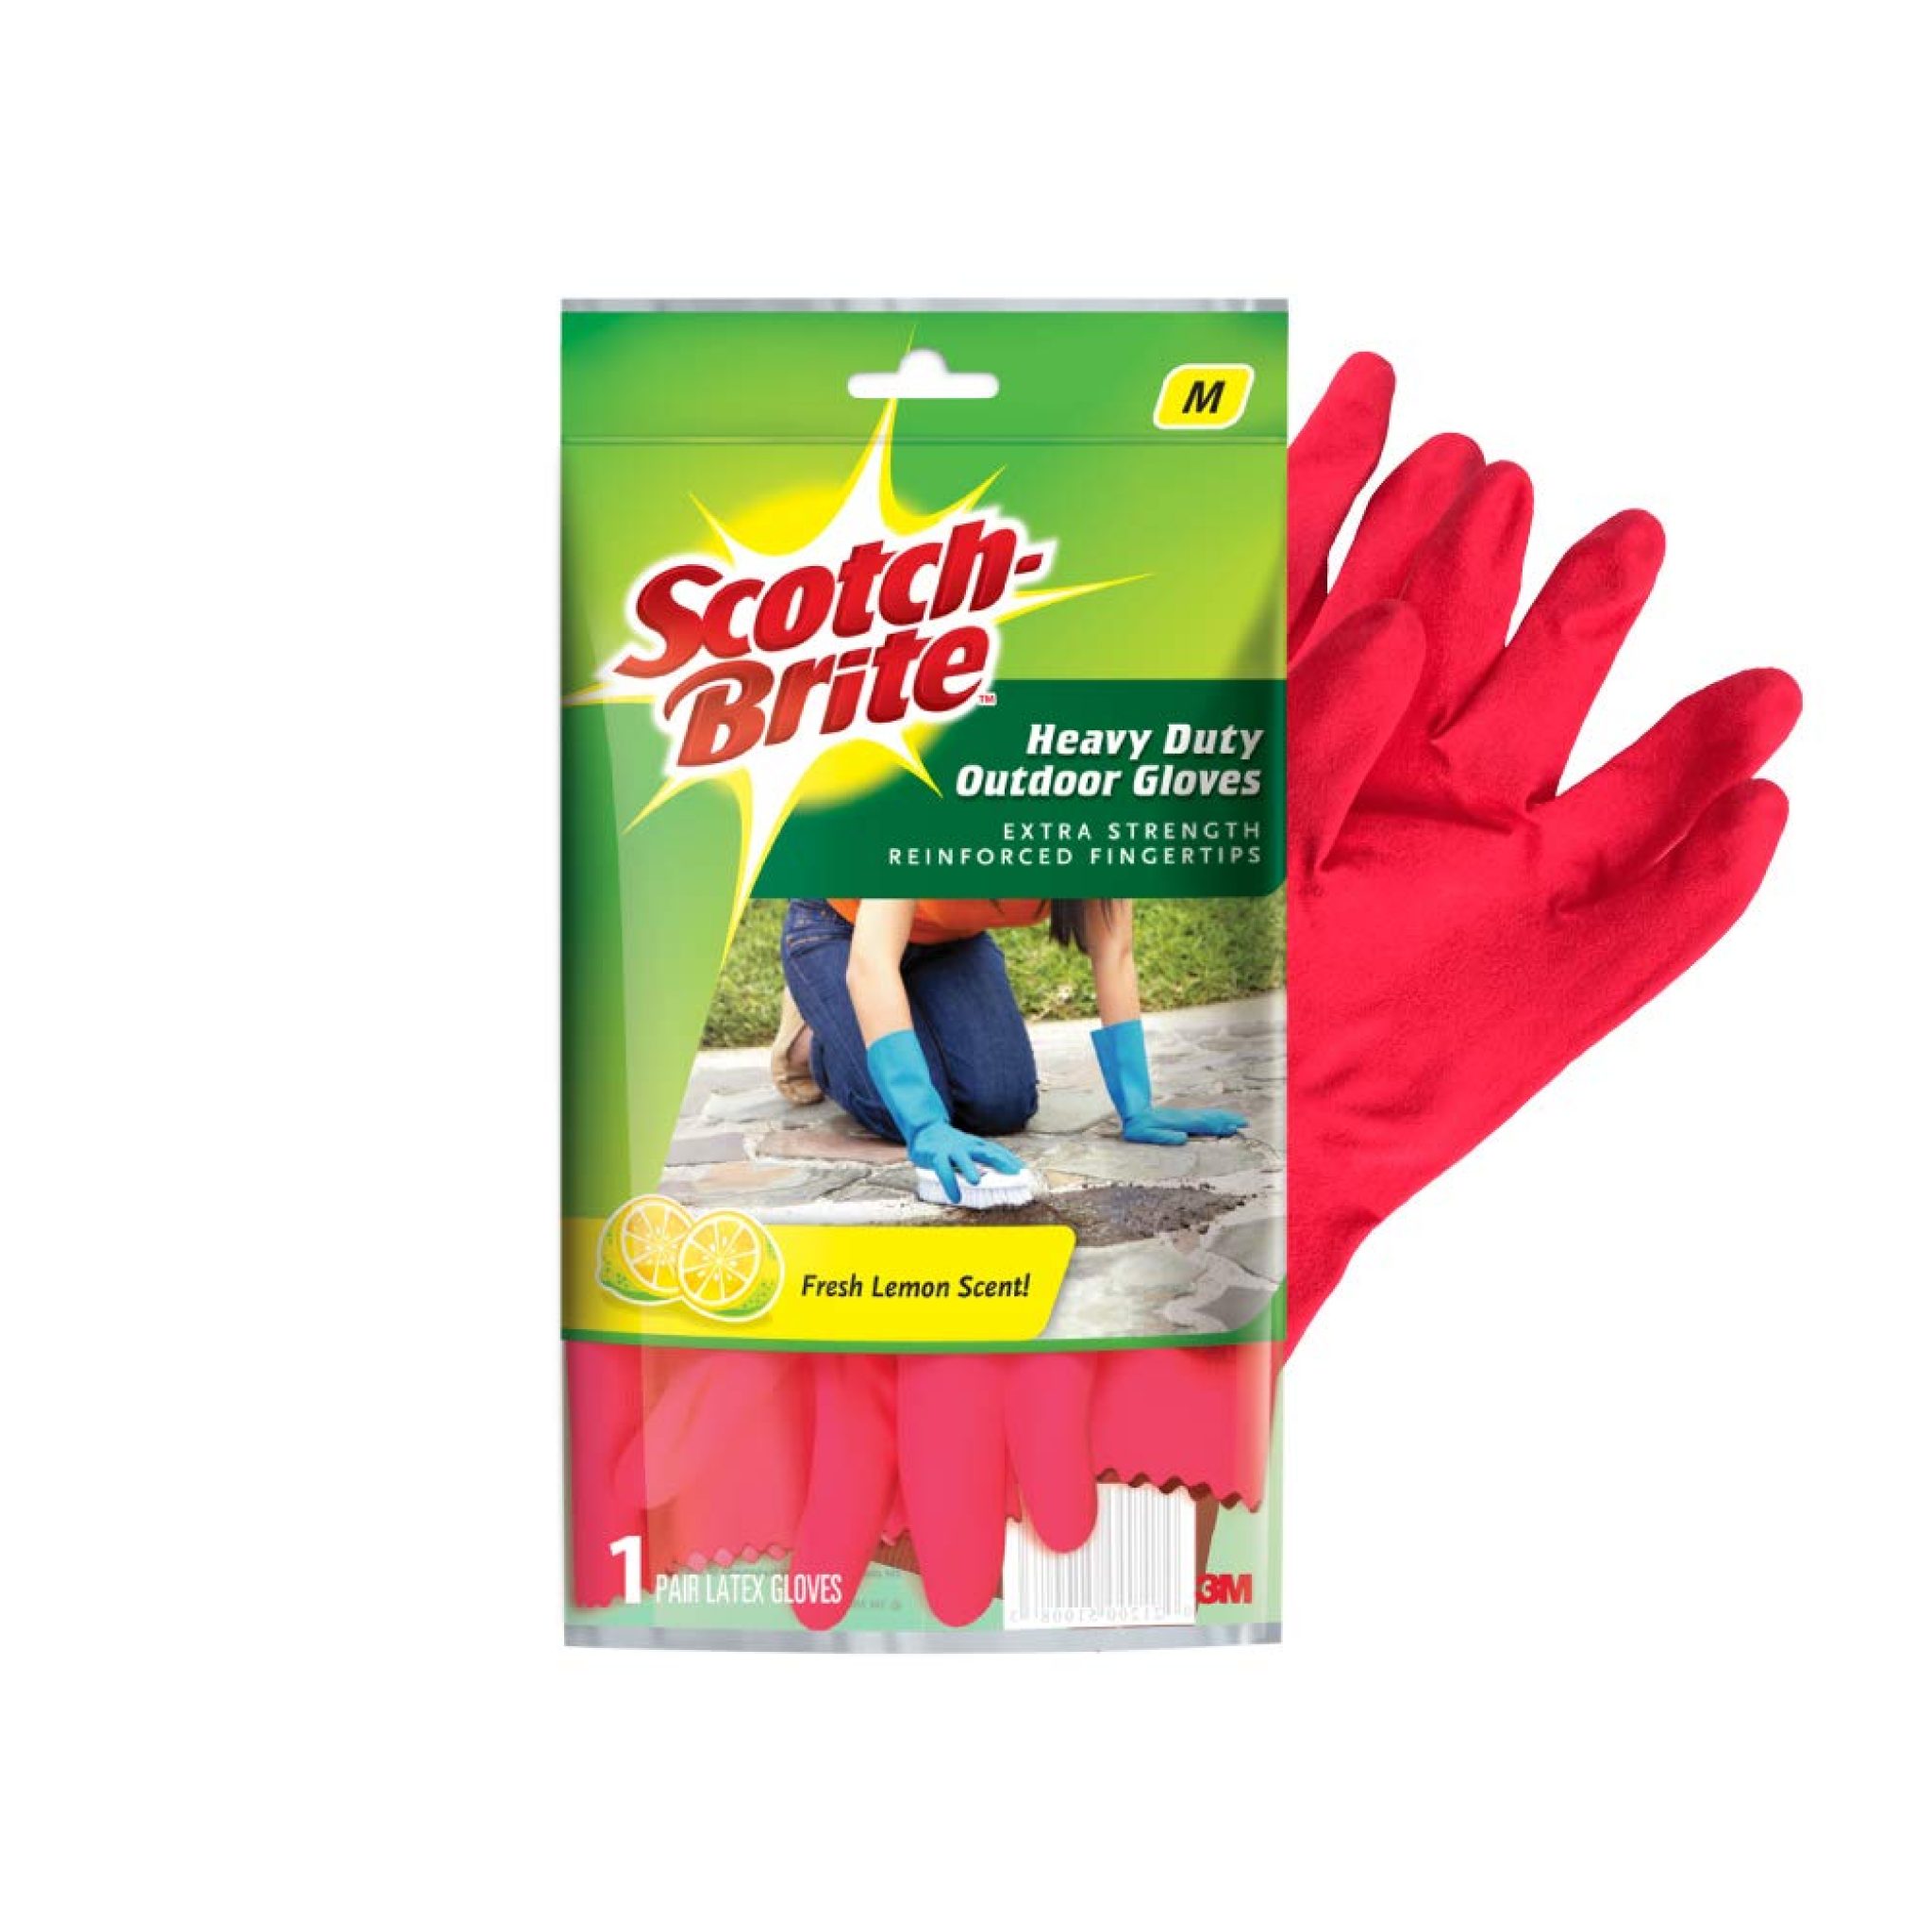 Scotch Brite Heavy Duty Gloves With Fresh Lemon Scent Inner Cotton Lining For Comfort Medium Red 2048x2048 